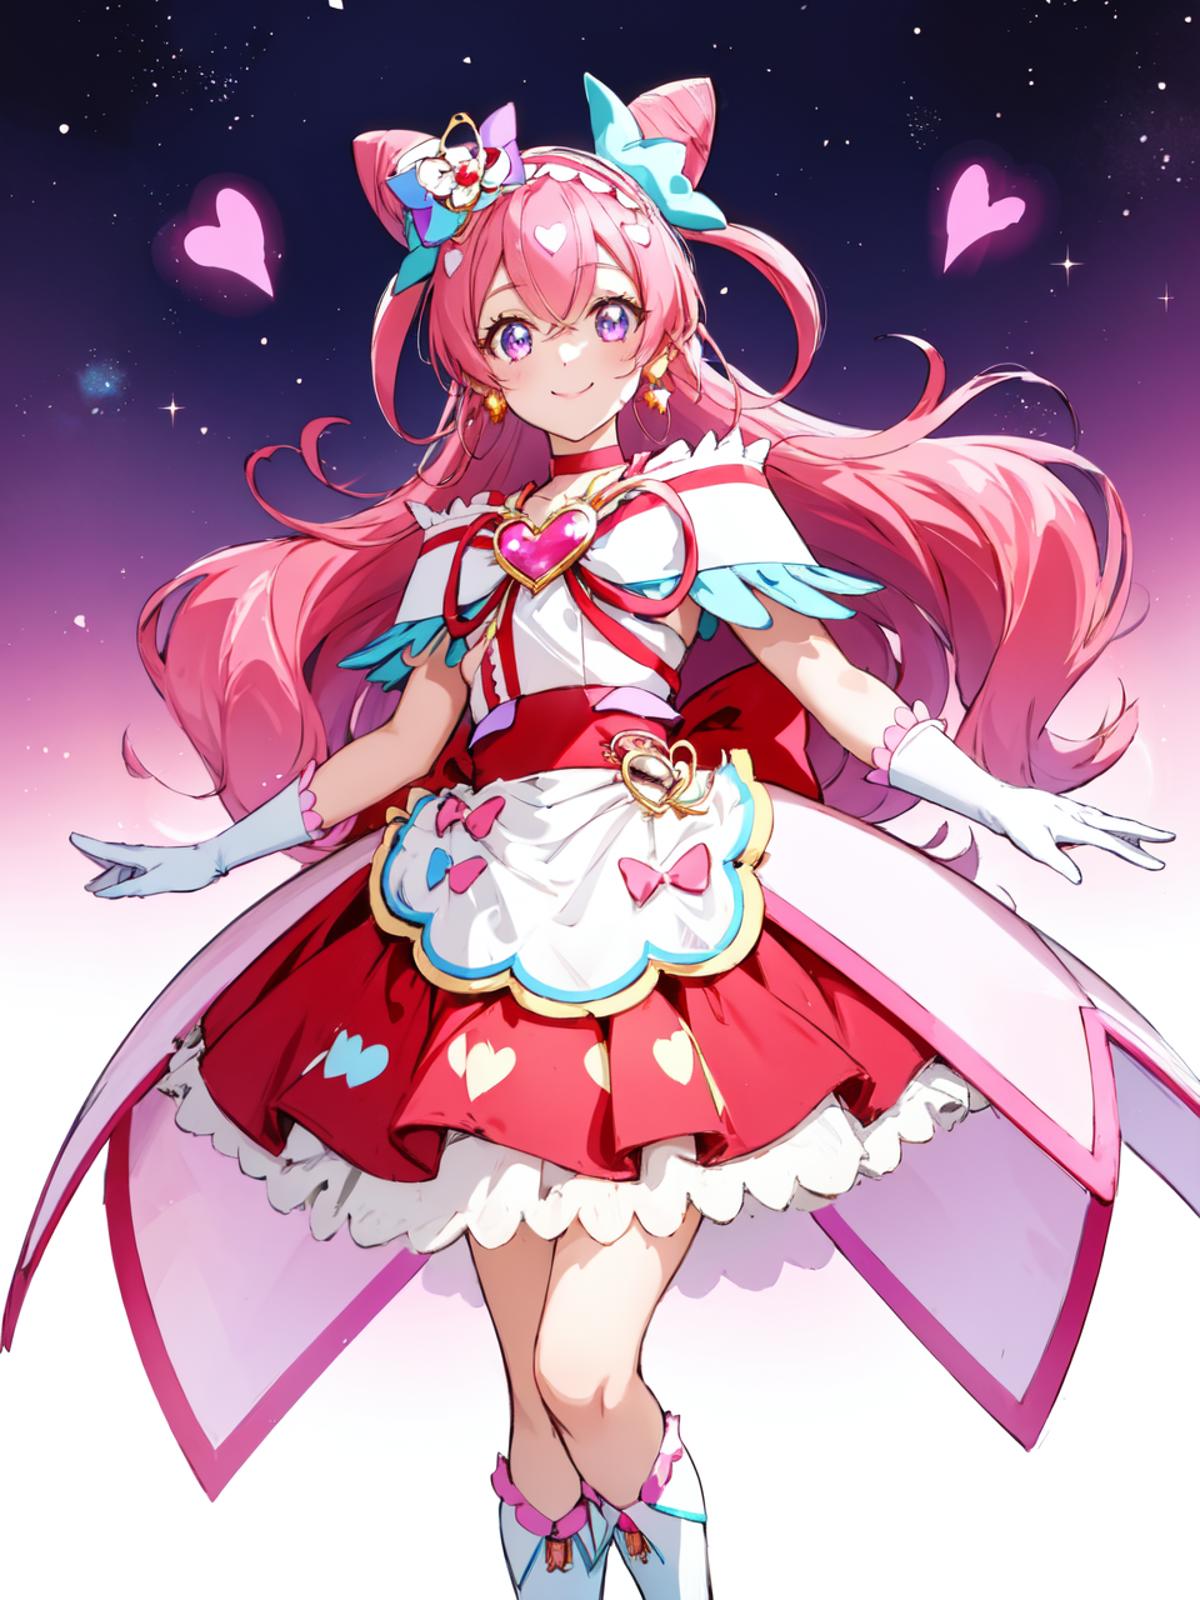 Cure Precious (Delicious Party♡Pretty Cure) デリシャスパーティ♡プリキュア キュアプレシャス image by secretmoon